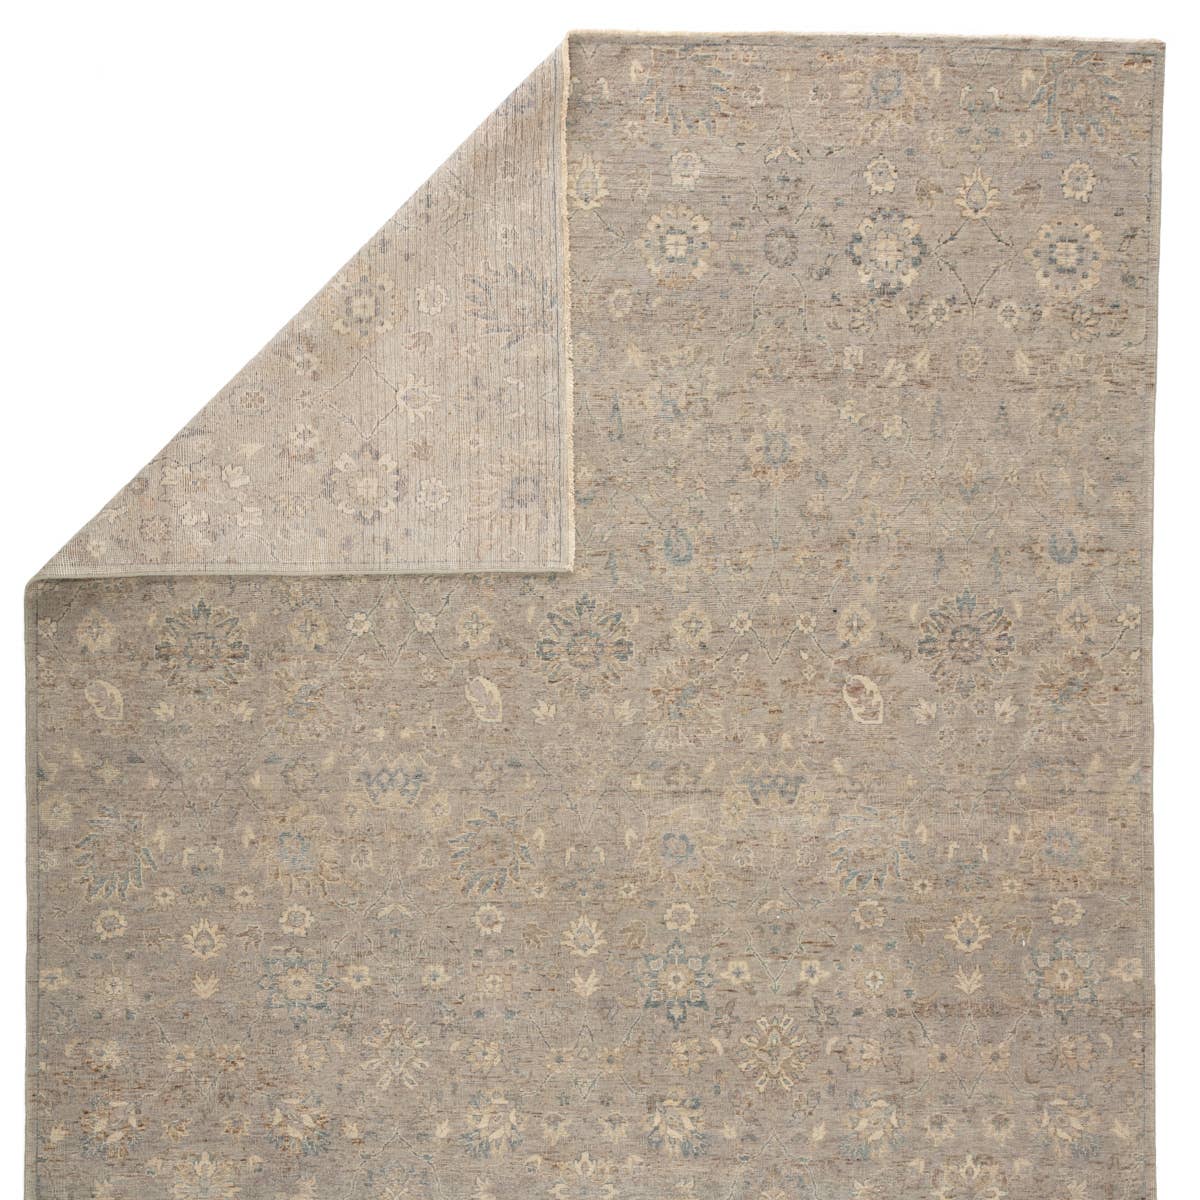 The Tierzah Pembe Area Rug by Jaipur Living, or TRZ02, boasts a Persian knot construction and tonal gray, beige, and brown palette that grounds any space. This artisan-made rug features fringe trimmed details for a touch of global charm. This is perfect for your living room, bedroom, or other medium traffic area. 